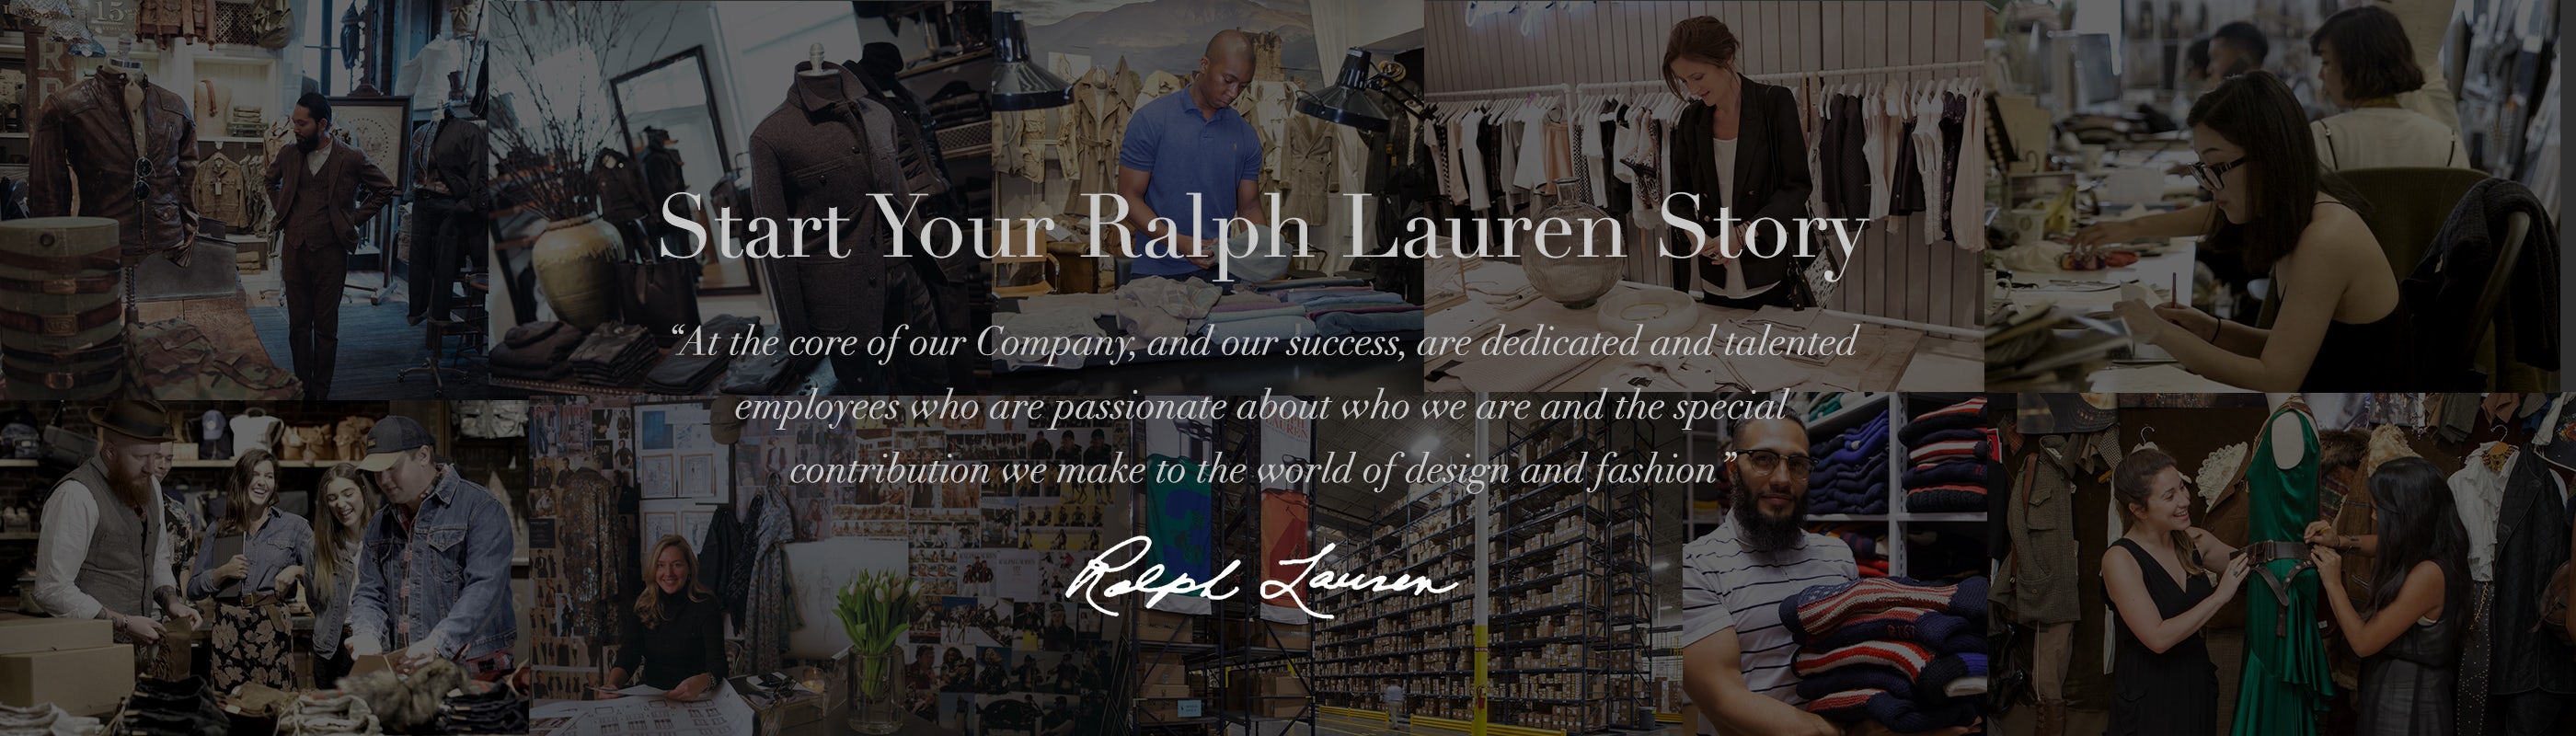 The Rags-to-Riches Story of Ralph Lauren